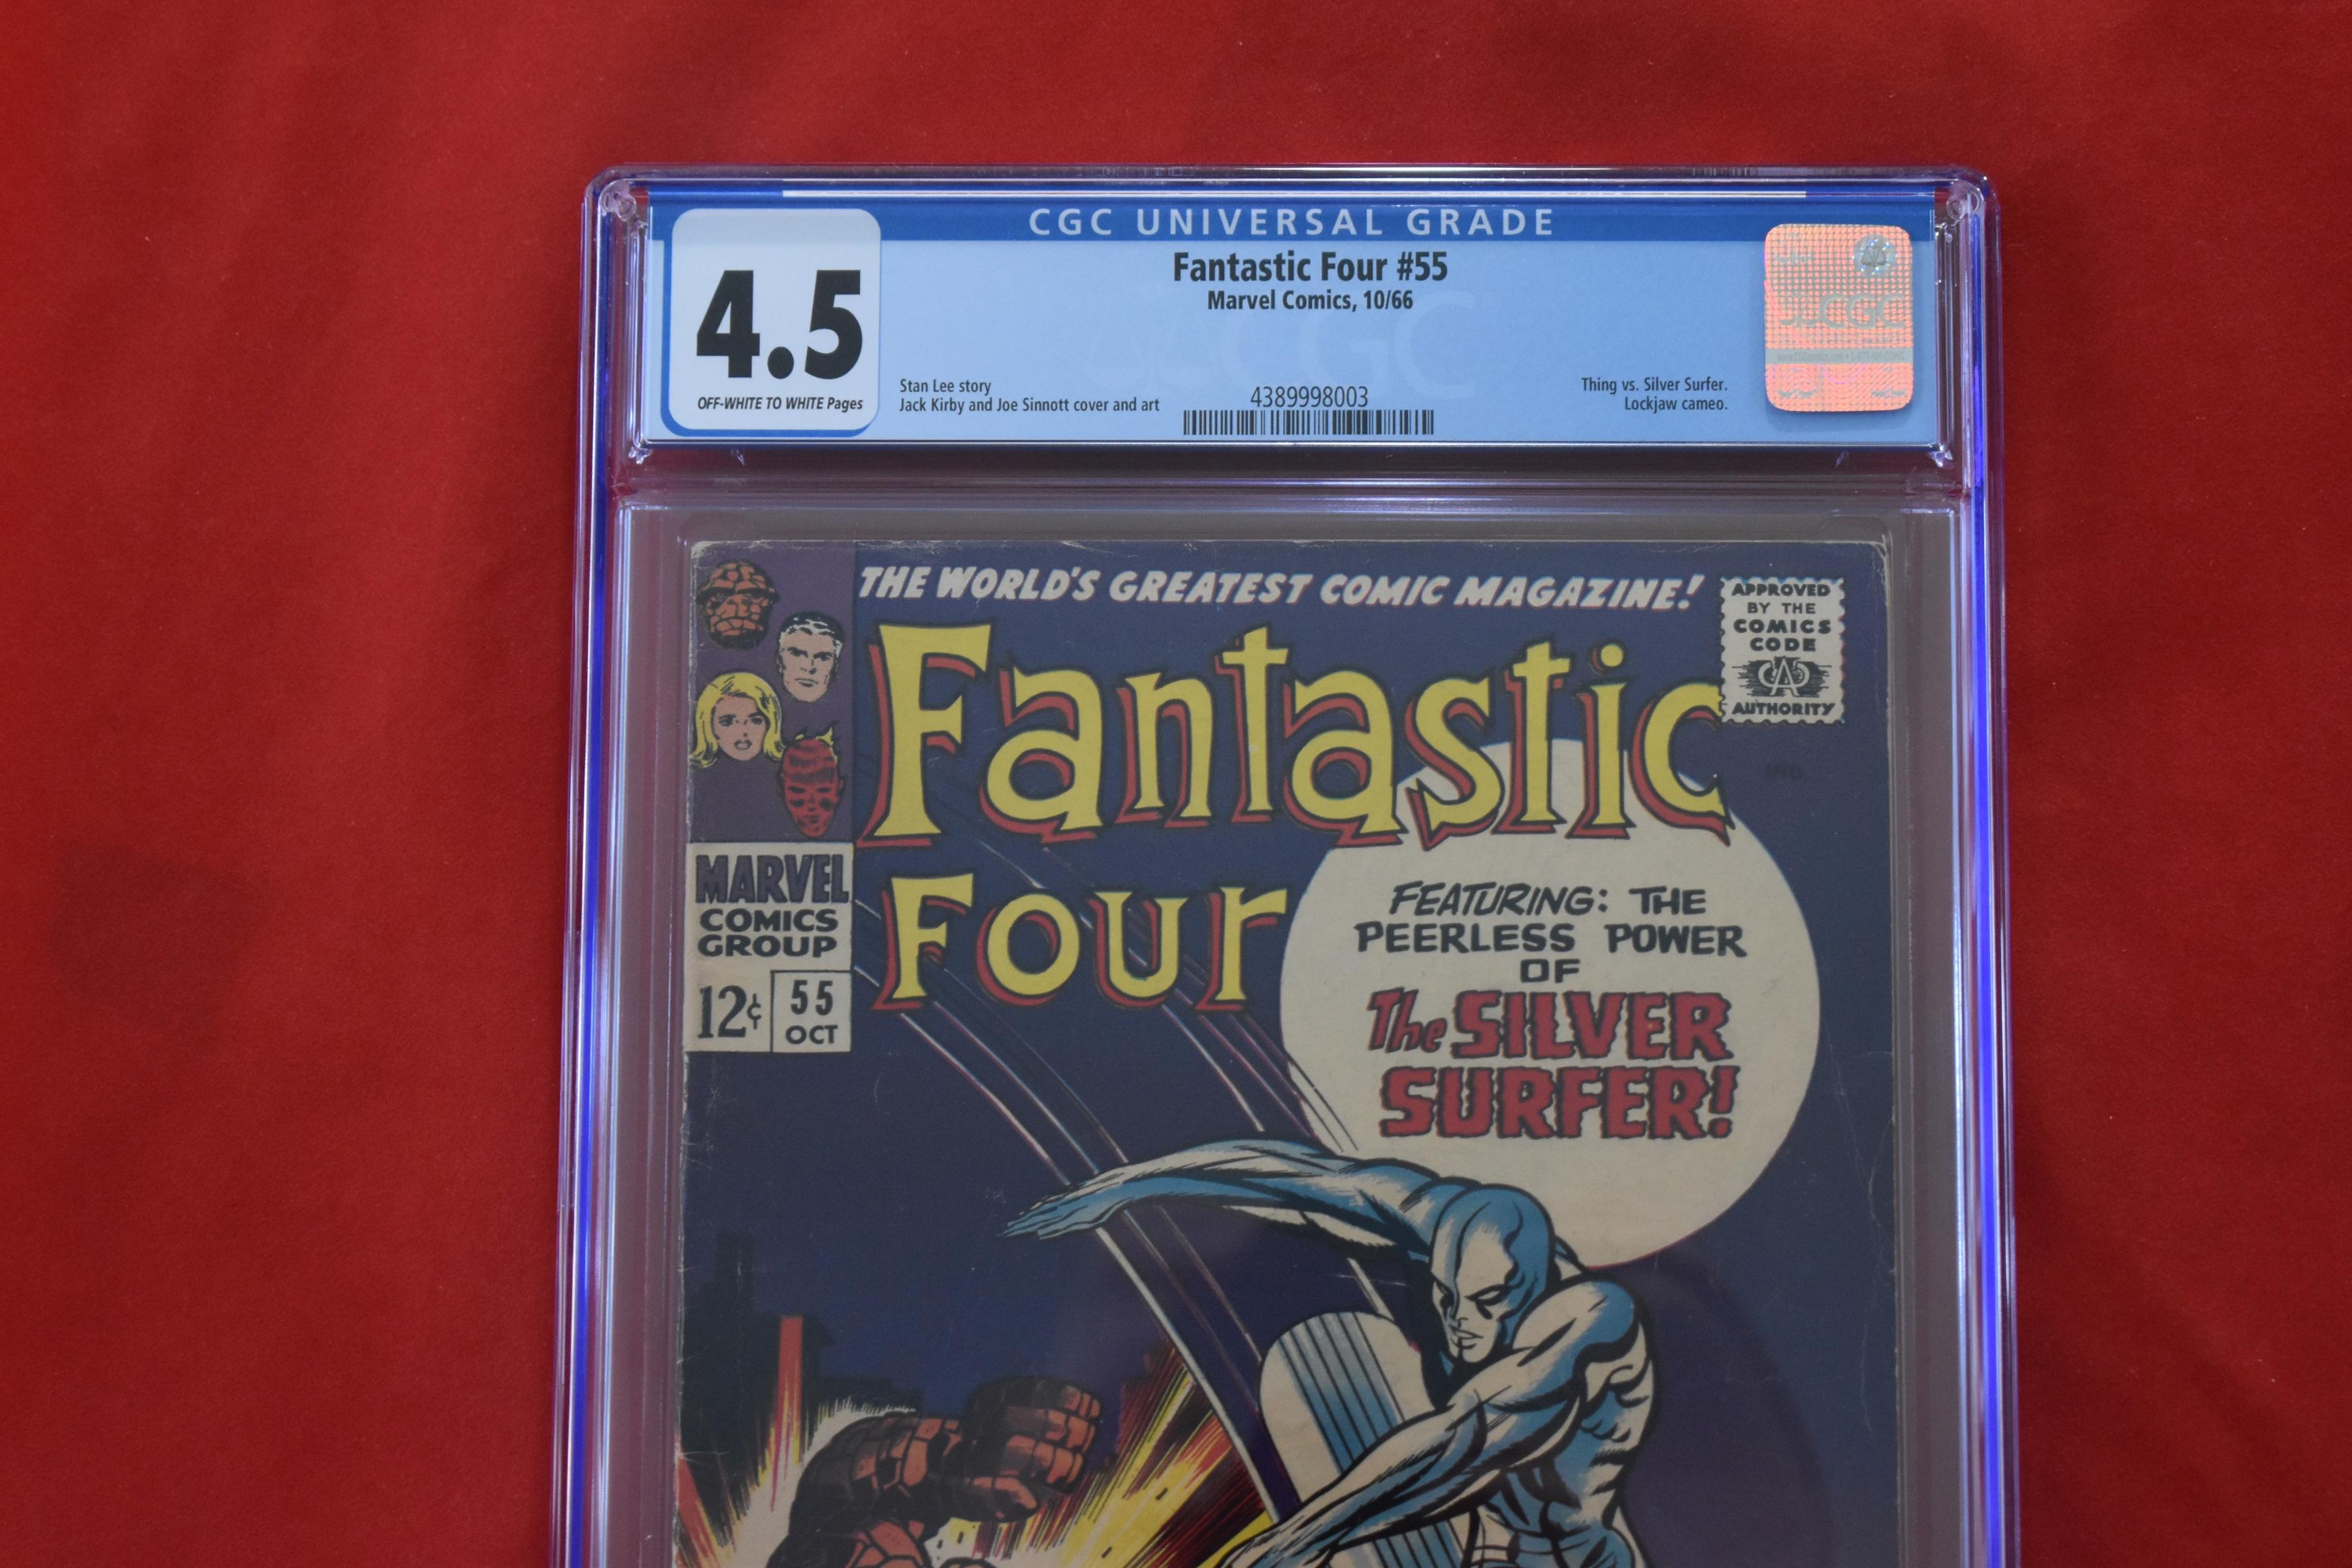 FANTASTIC FOUR #55 | KEY ICONIC KIRBY COVER FEATURING THING & SILVER SURFER!